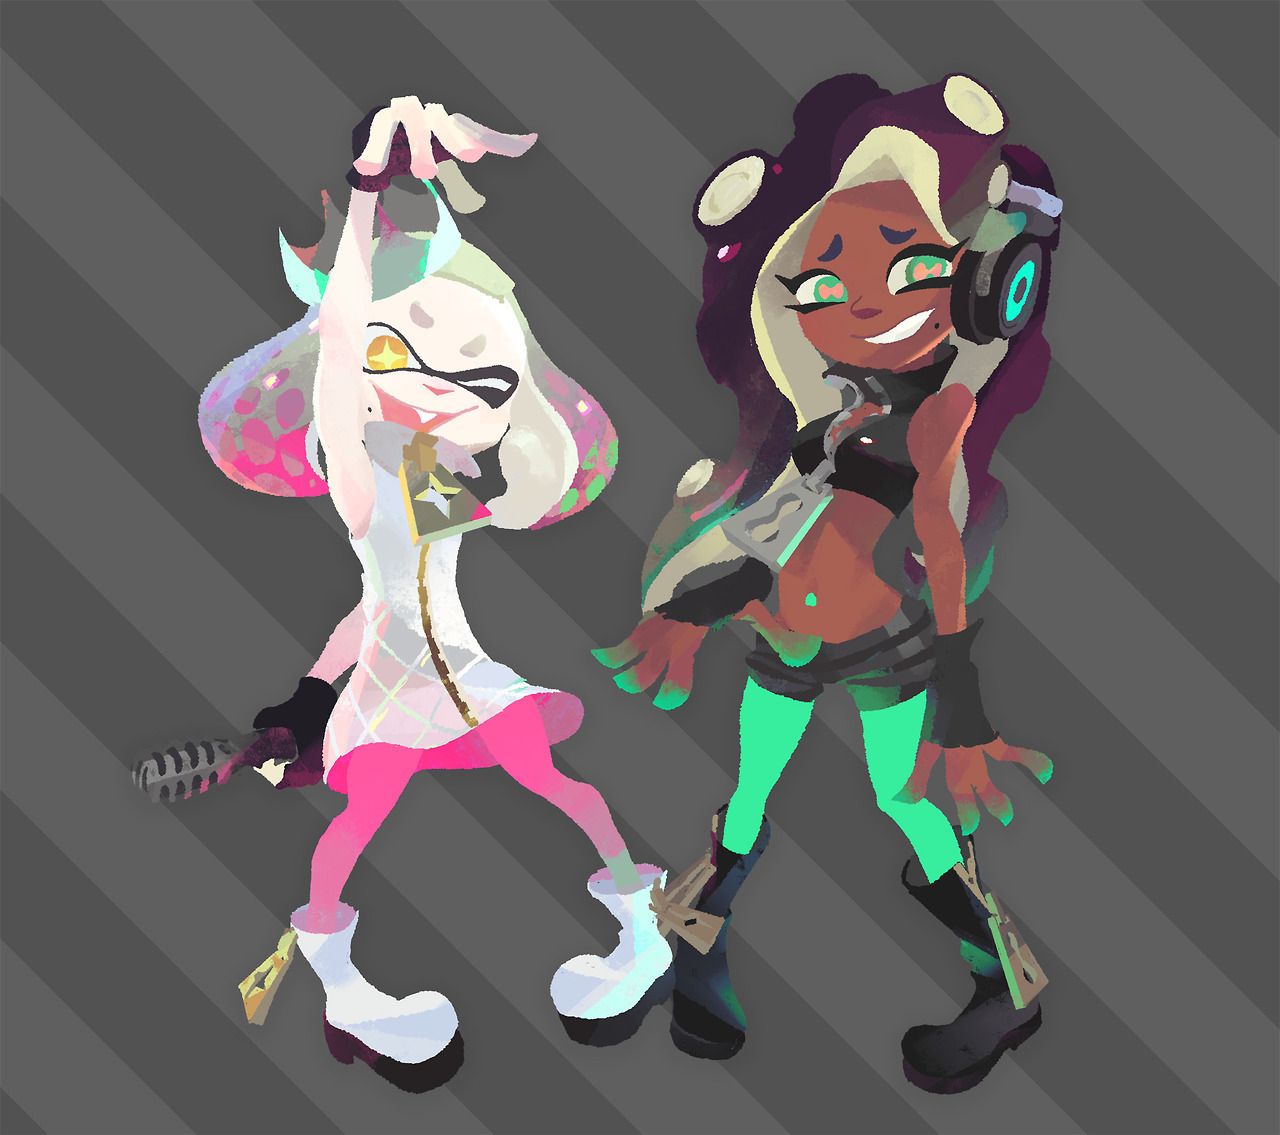 These lovely ladies are the rising stars who’ve been burning up the Inkling music charts, Off the Hook! First you’ve got Pearl, the cute and sassy MC with a talent for spitting fire lyrics.Then you’ve got Marina, the dazzling DJ genius rocking beats...